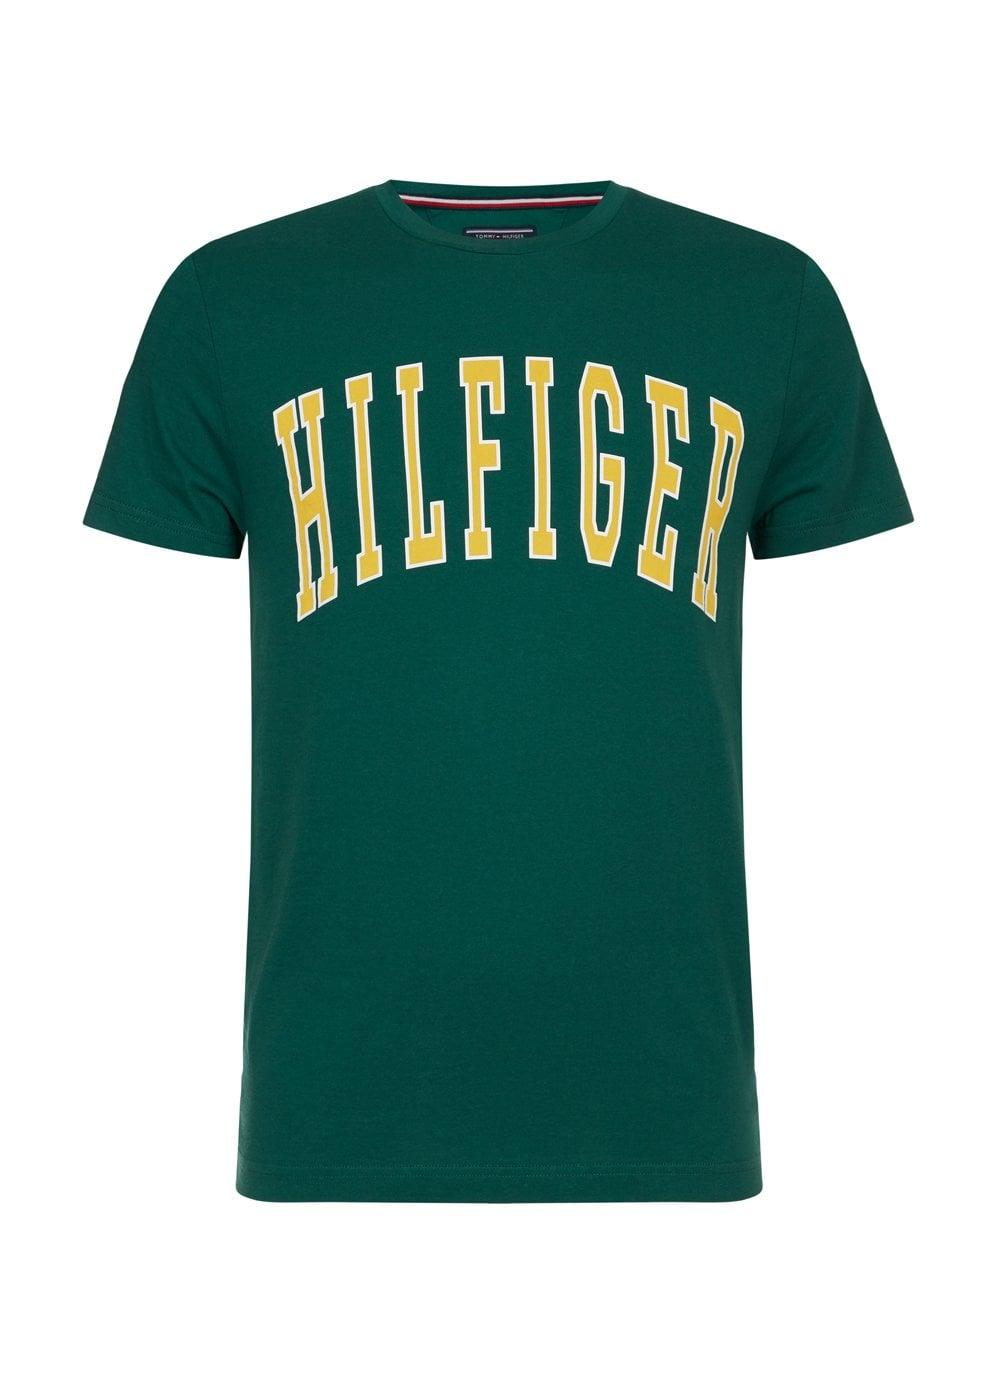 Green Clothing Logo - Tommy Hilfiger Mens College Logo Tee Green from Time